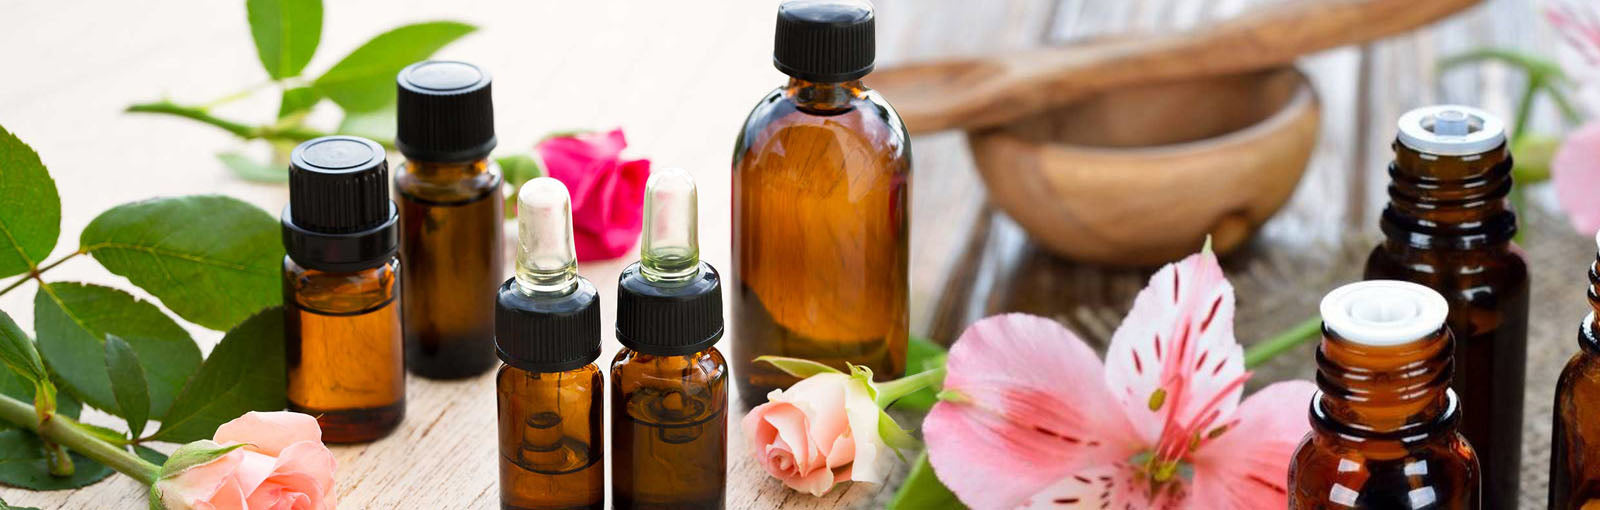 The History of Aromatherapy, Symptoms, and Use Case